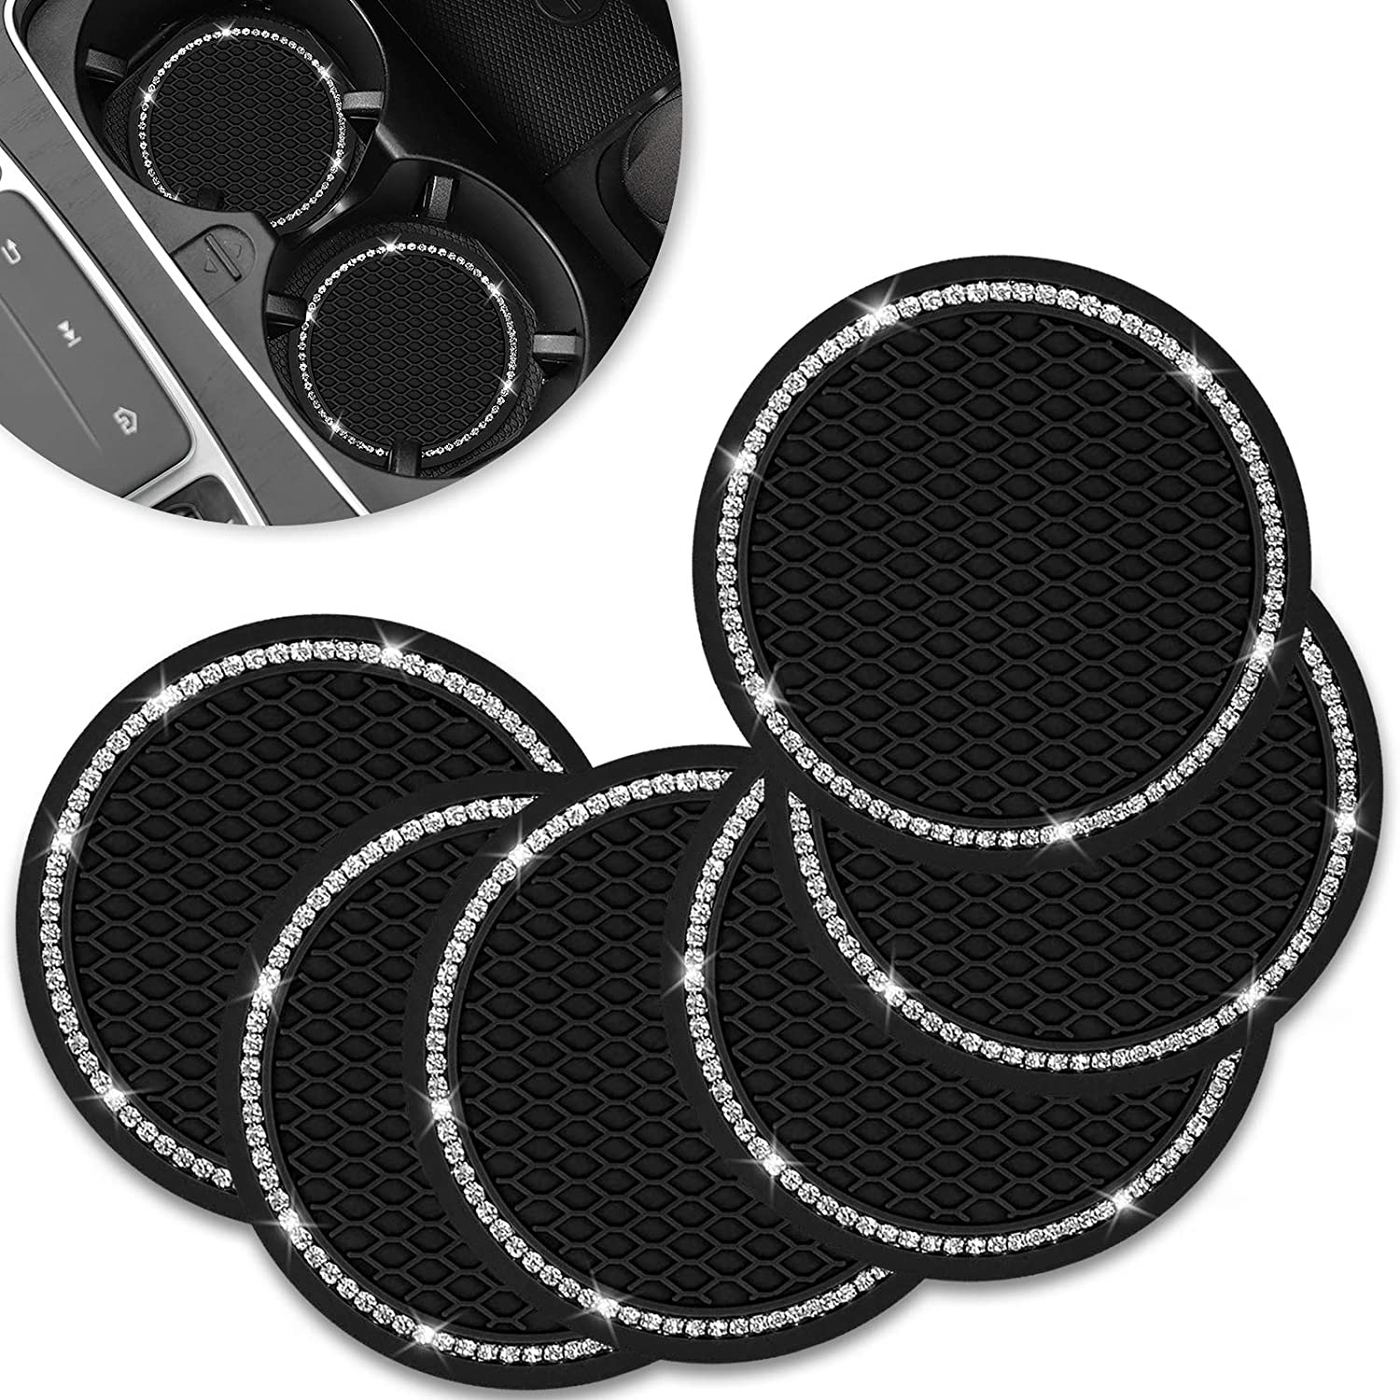 Bling Car Coaster, SHANSHUI 6 Pack Universal Vehicle Cup Holders for Car Cute Silicone Anti-Slip Insert Coaster Crystal Rhinestone Interior Accessories Suitable for Most Cars (Black/ 6Pcs)